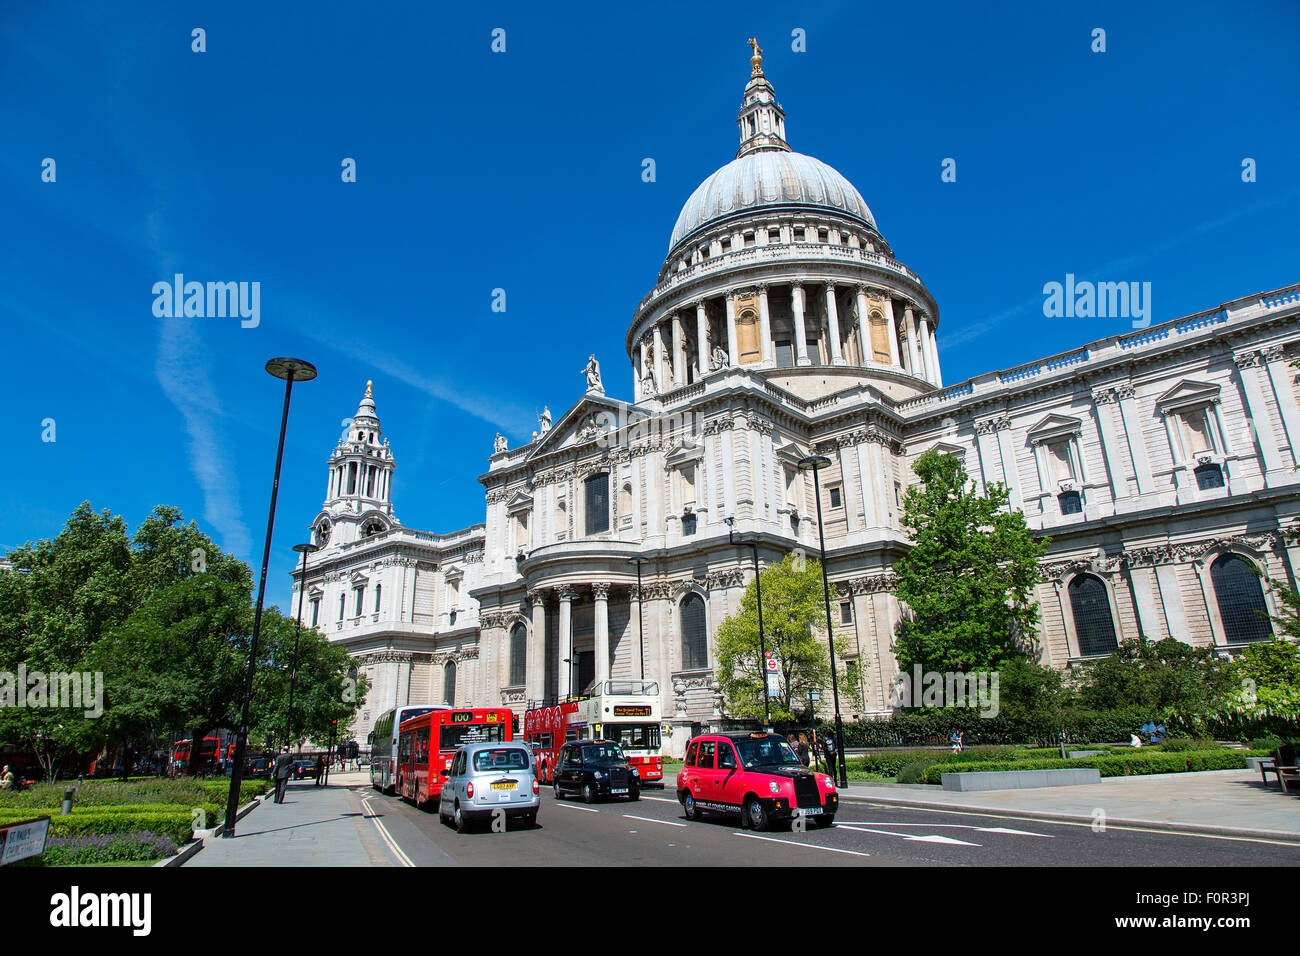 England, London, St. Paul's Cathedral Stock Photo